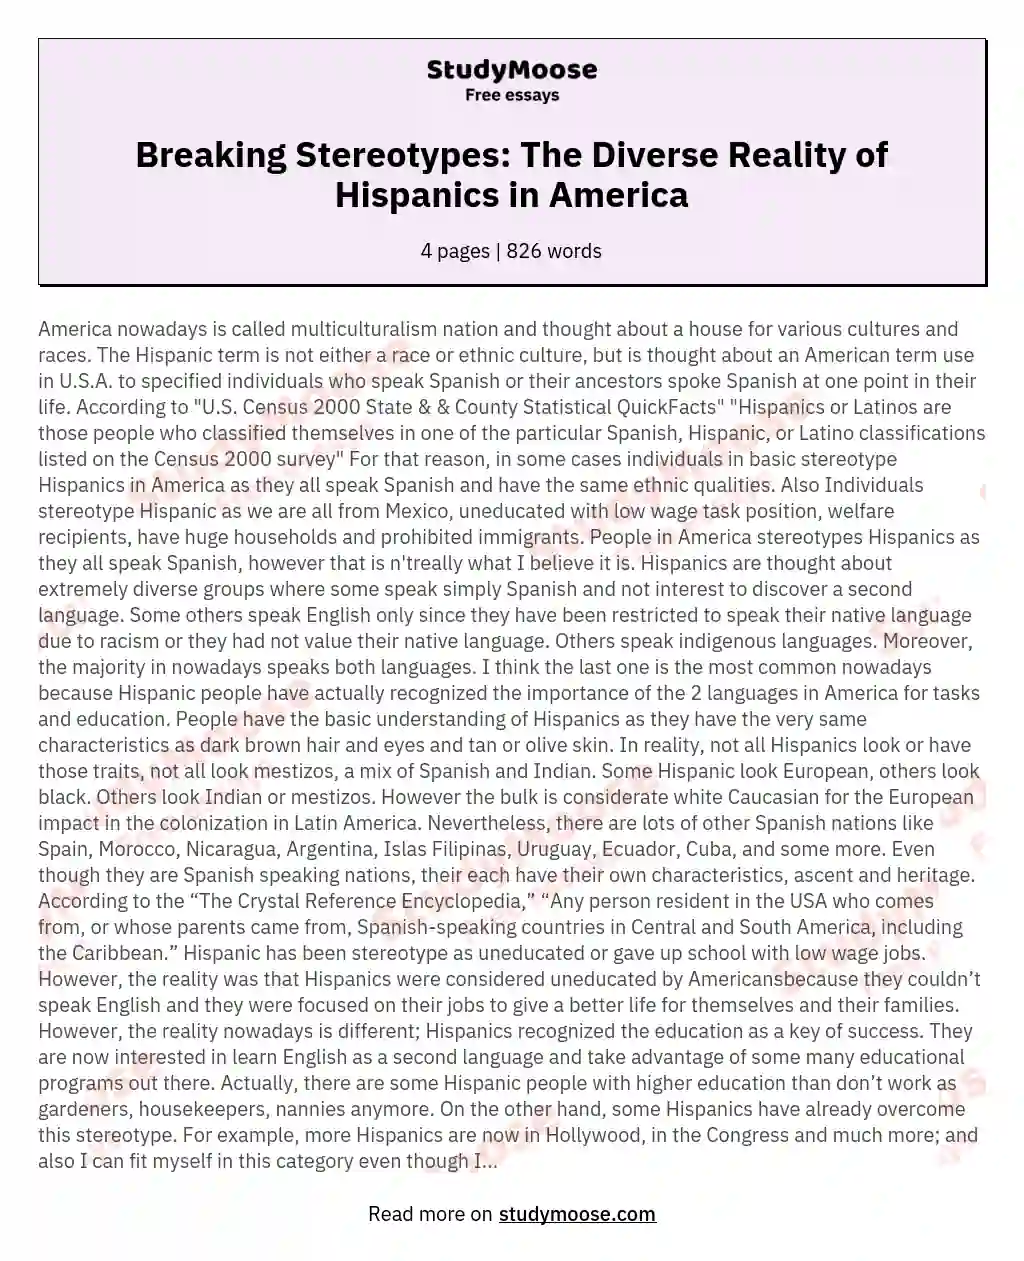 Breaking Stereotypes: The Diverse Reality of Hispanics in America essay